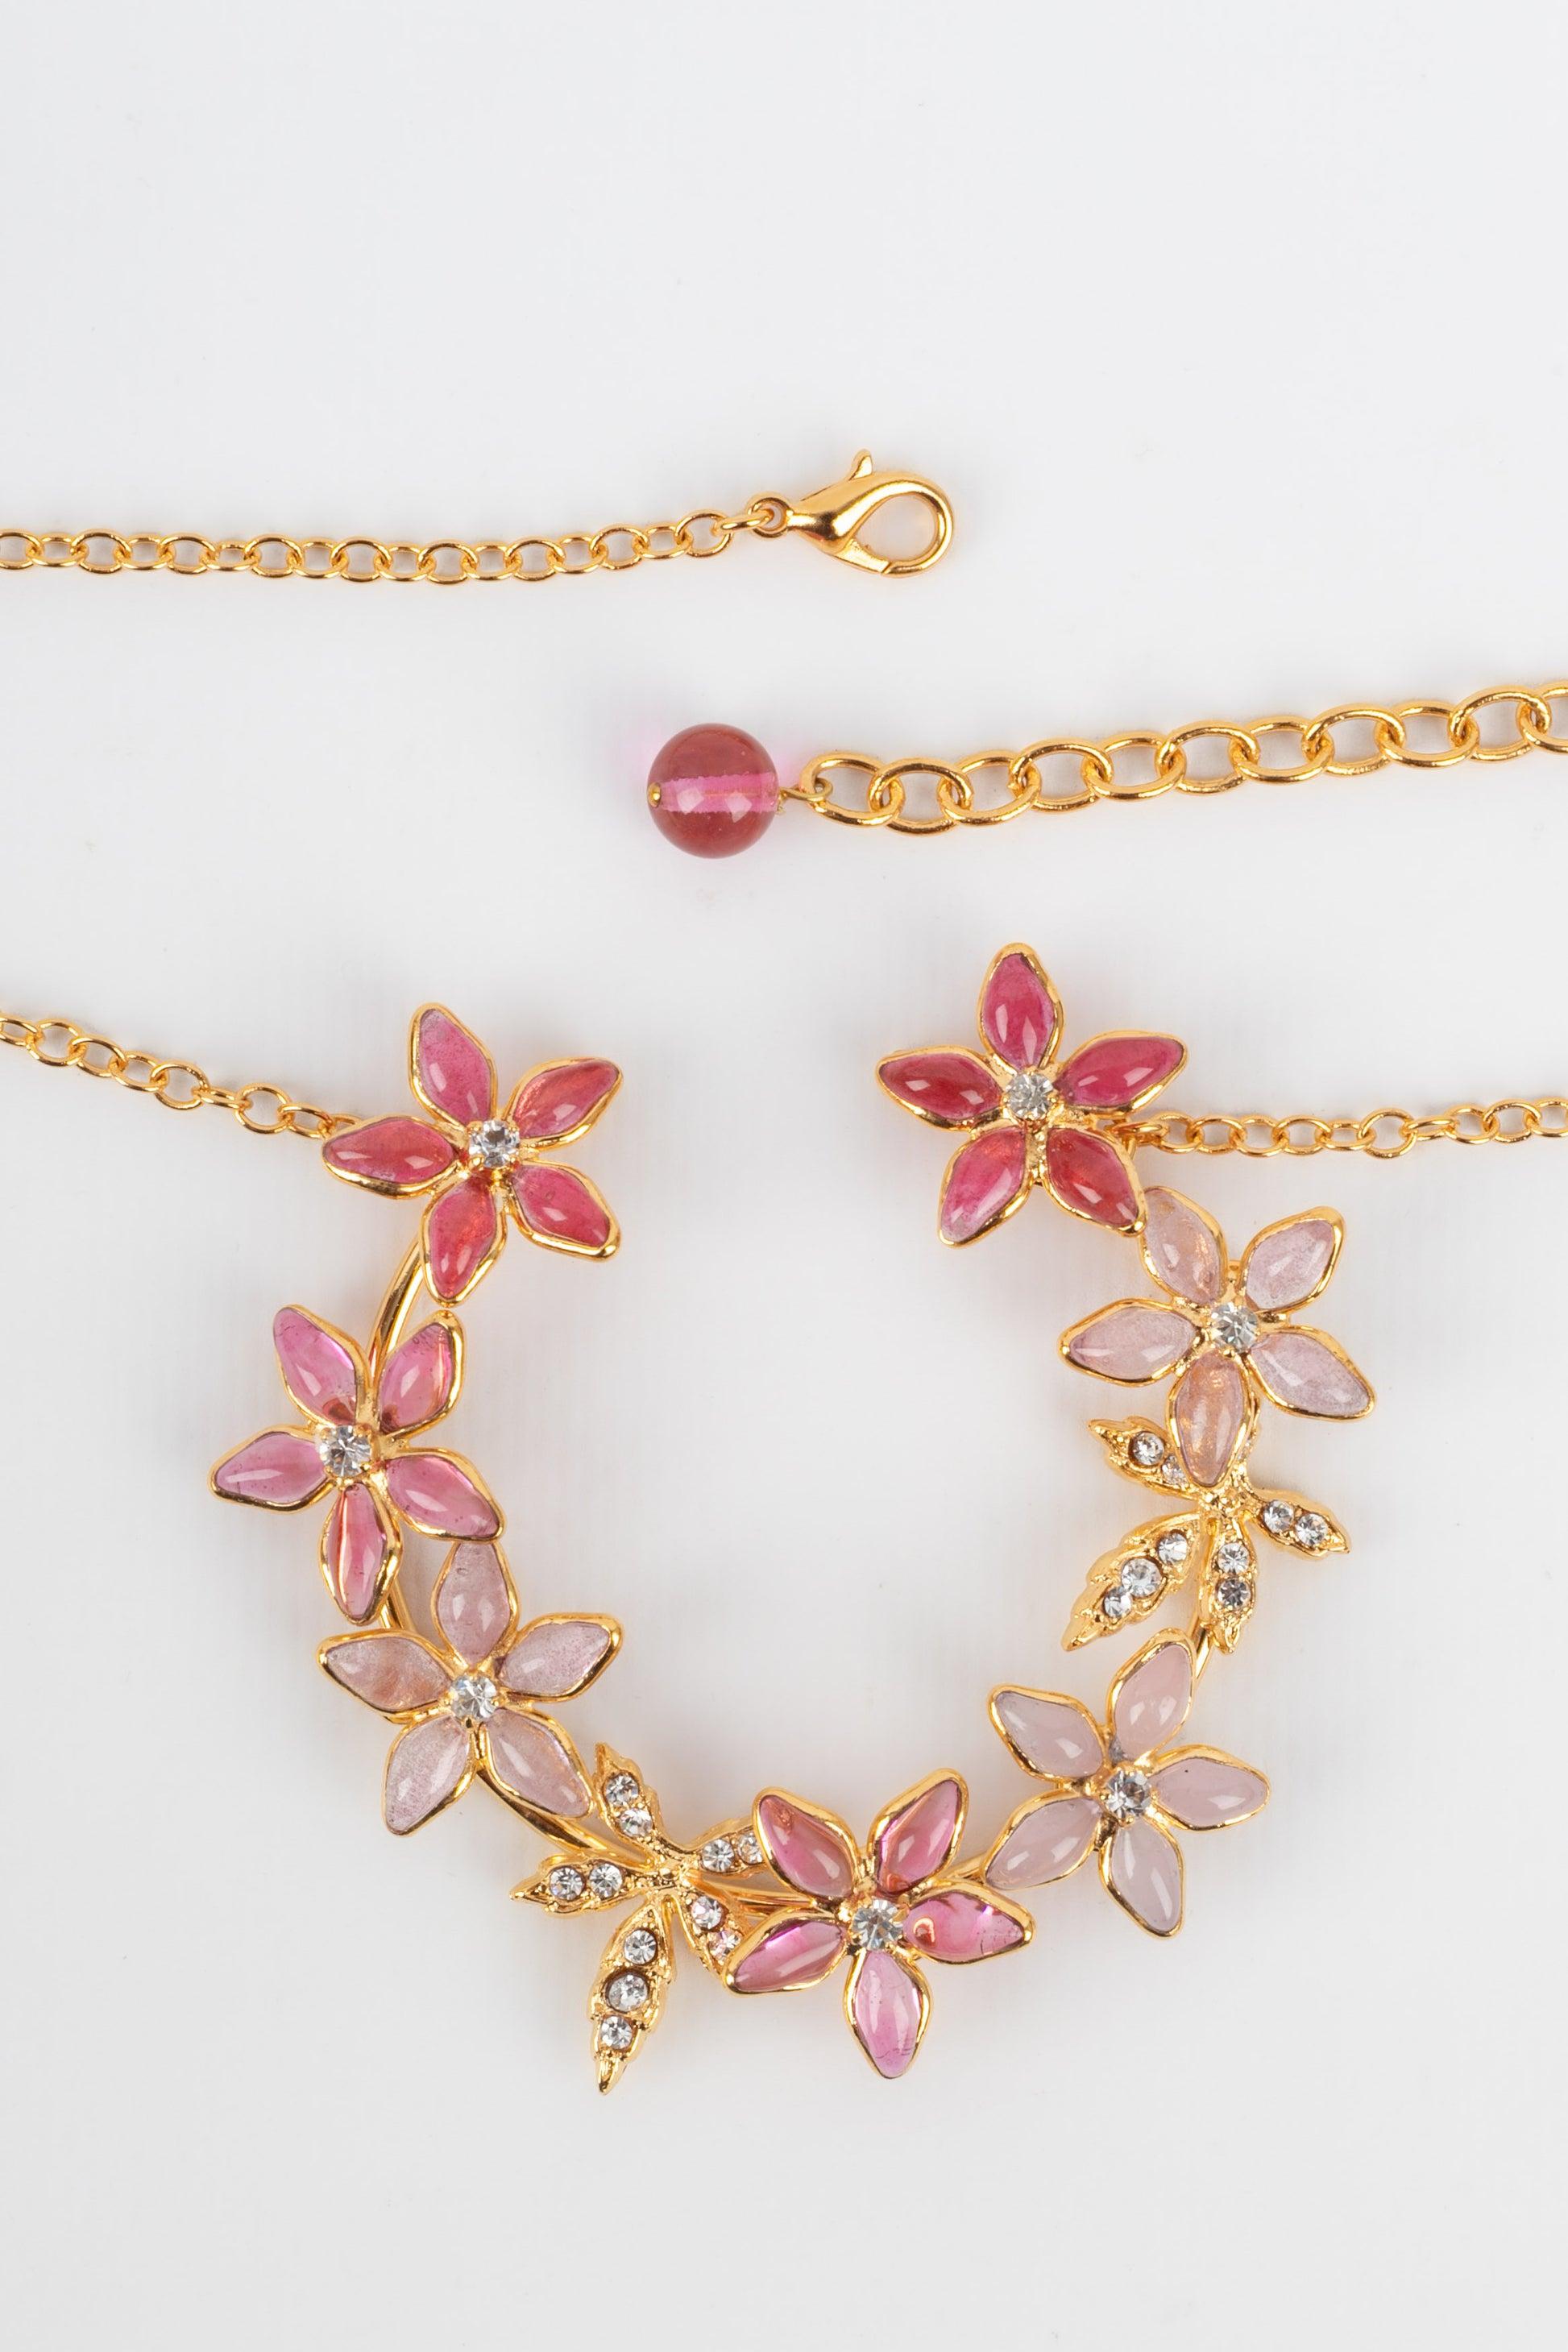 Augustine Golden Metal Necklace with Rhinestones and Glass Paste in Pink Tones In Excellent Condition For Sale In SAINT-OUEN-SUR-SEINE, FR